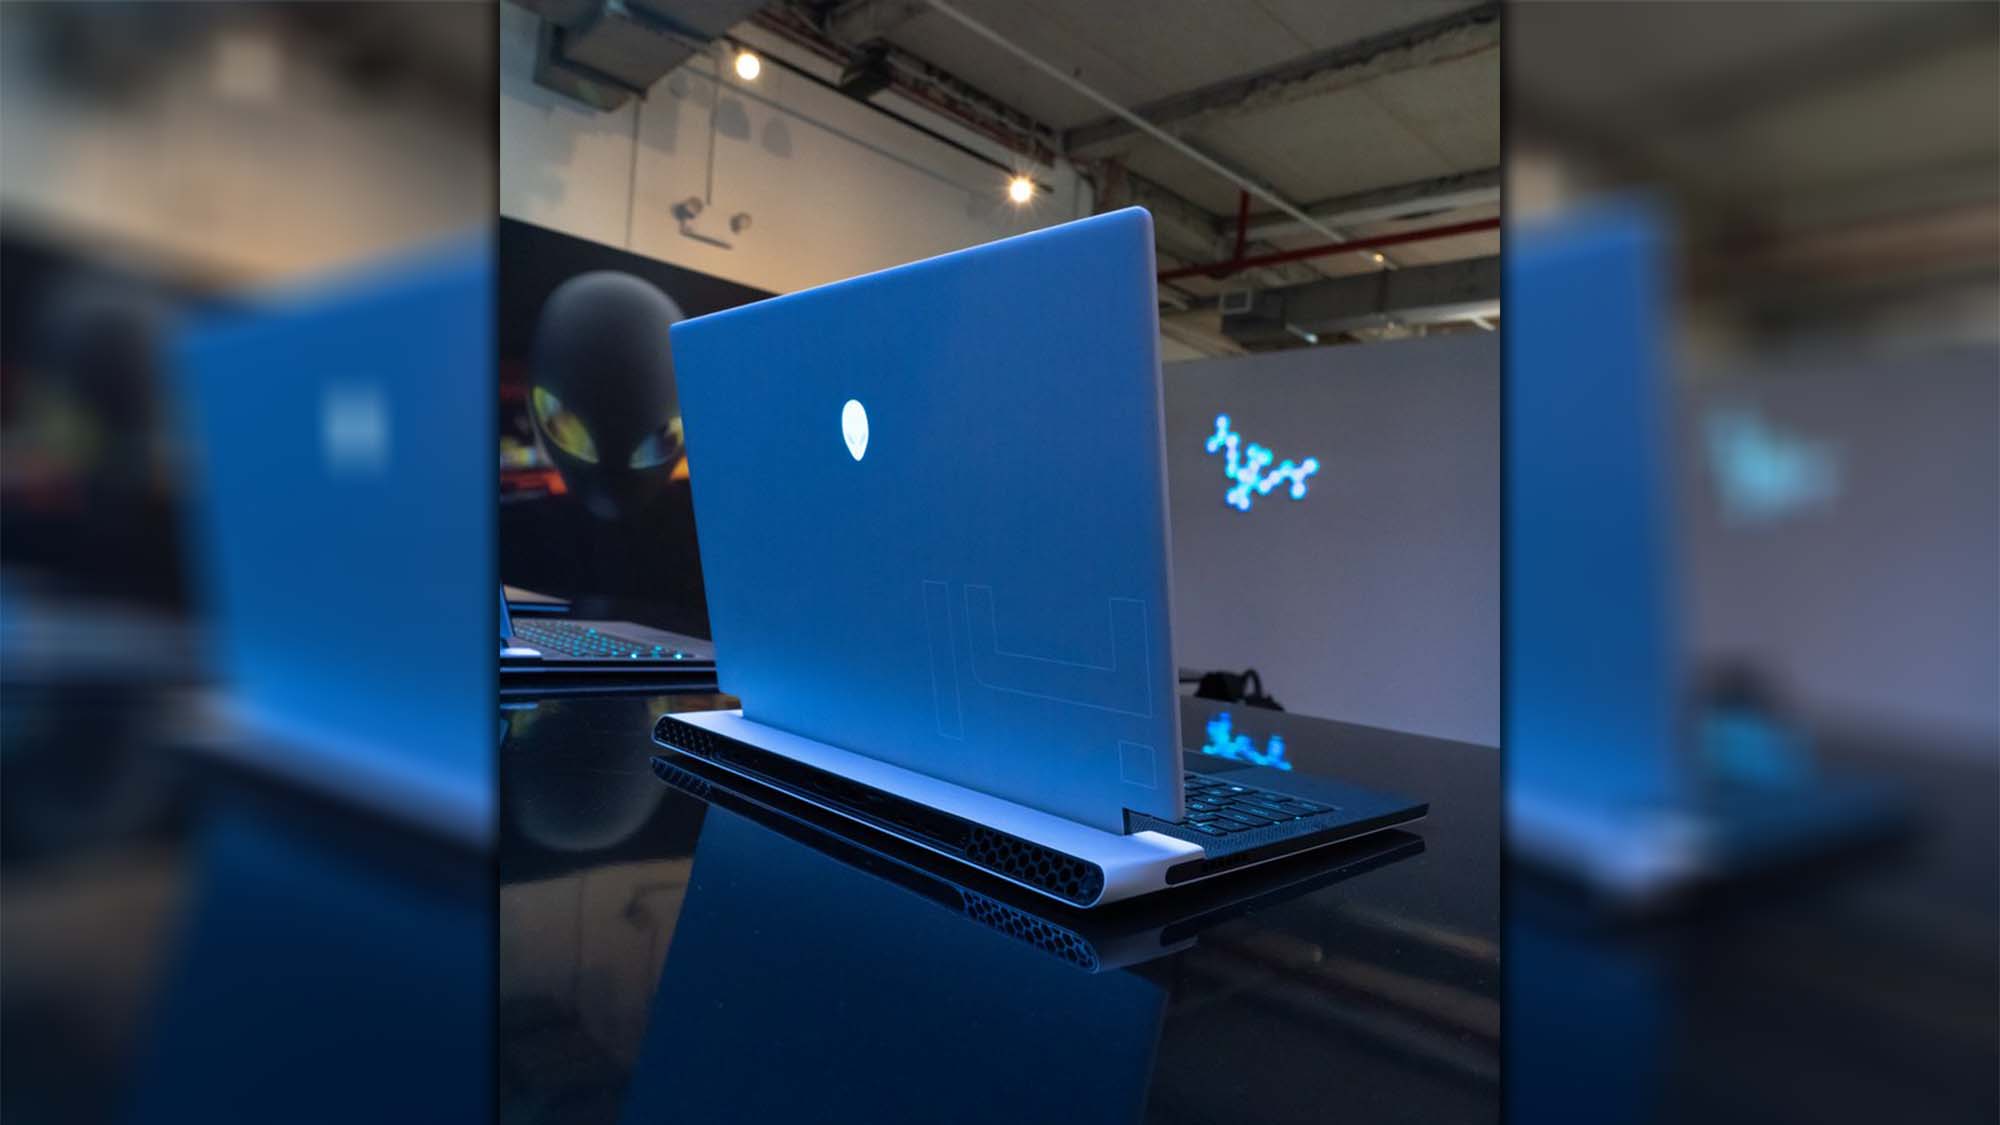 An Alienware gaming laptop on a table in a darkened room